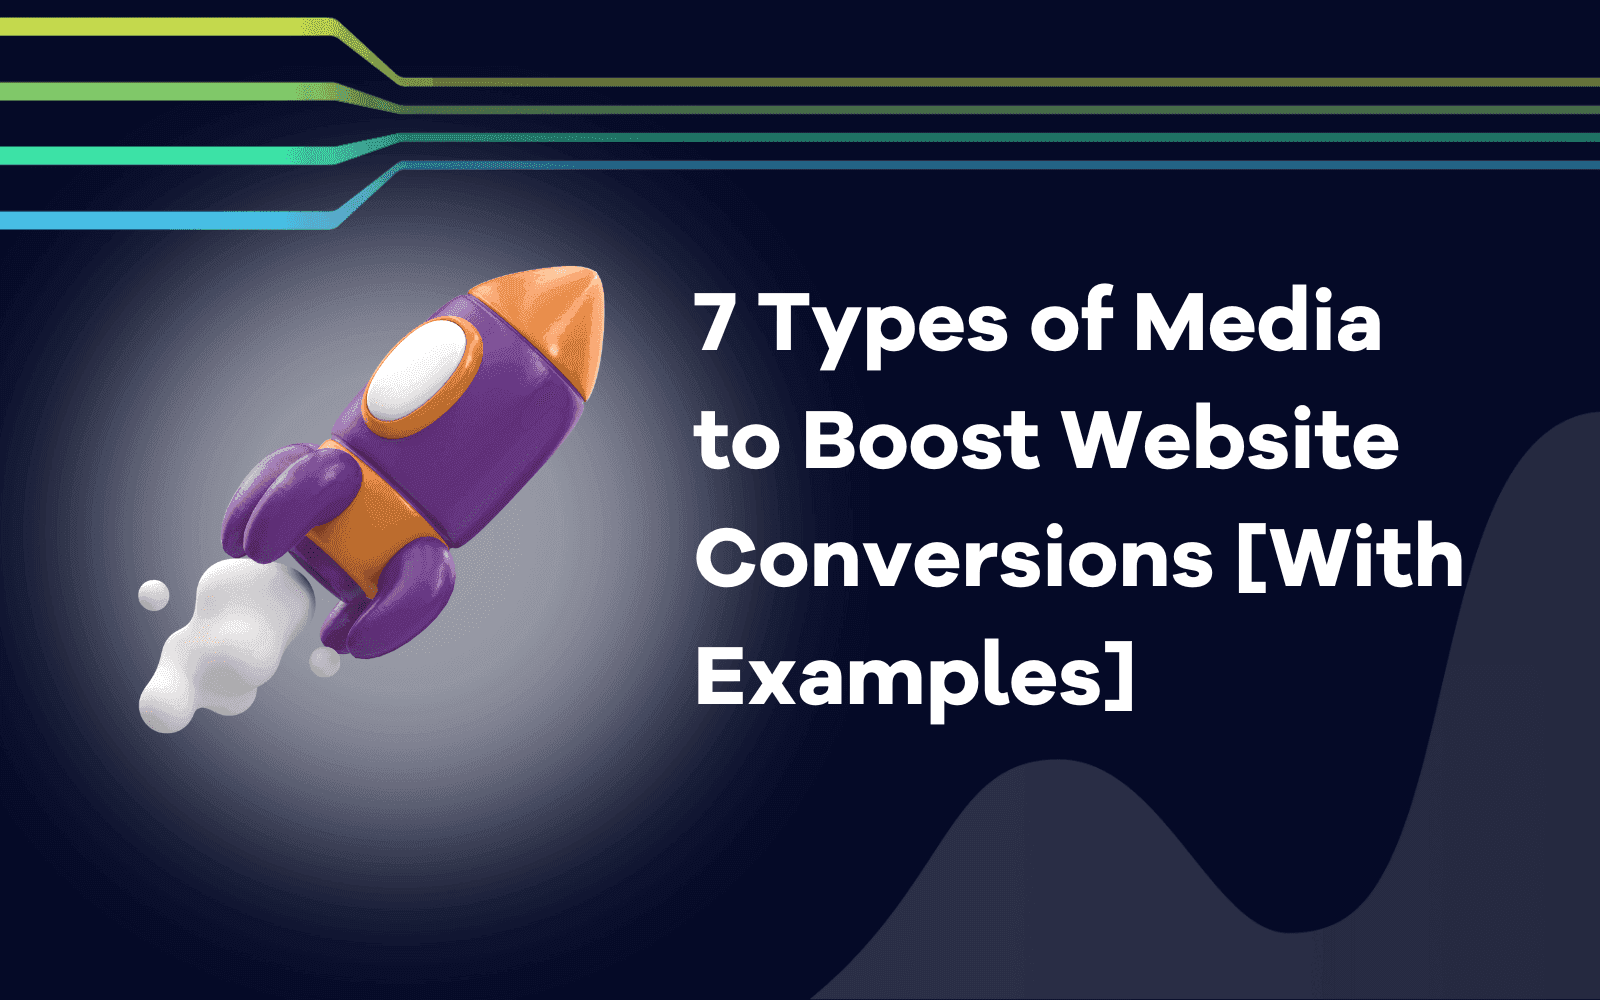 Types of Media to Boost Website Conversions